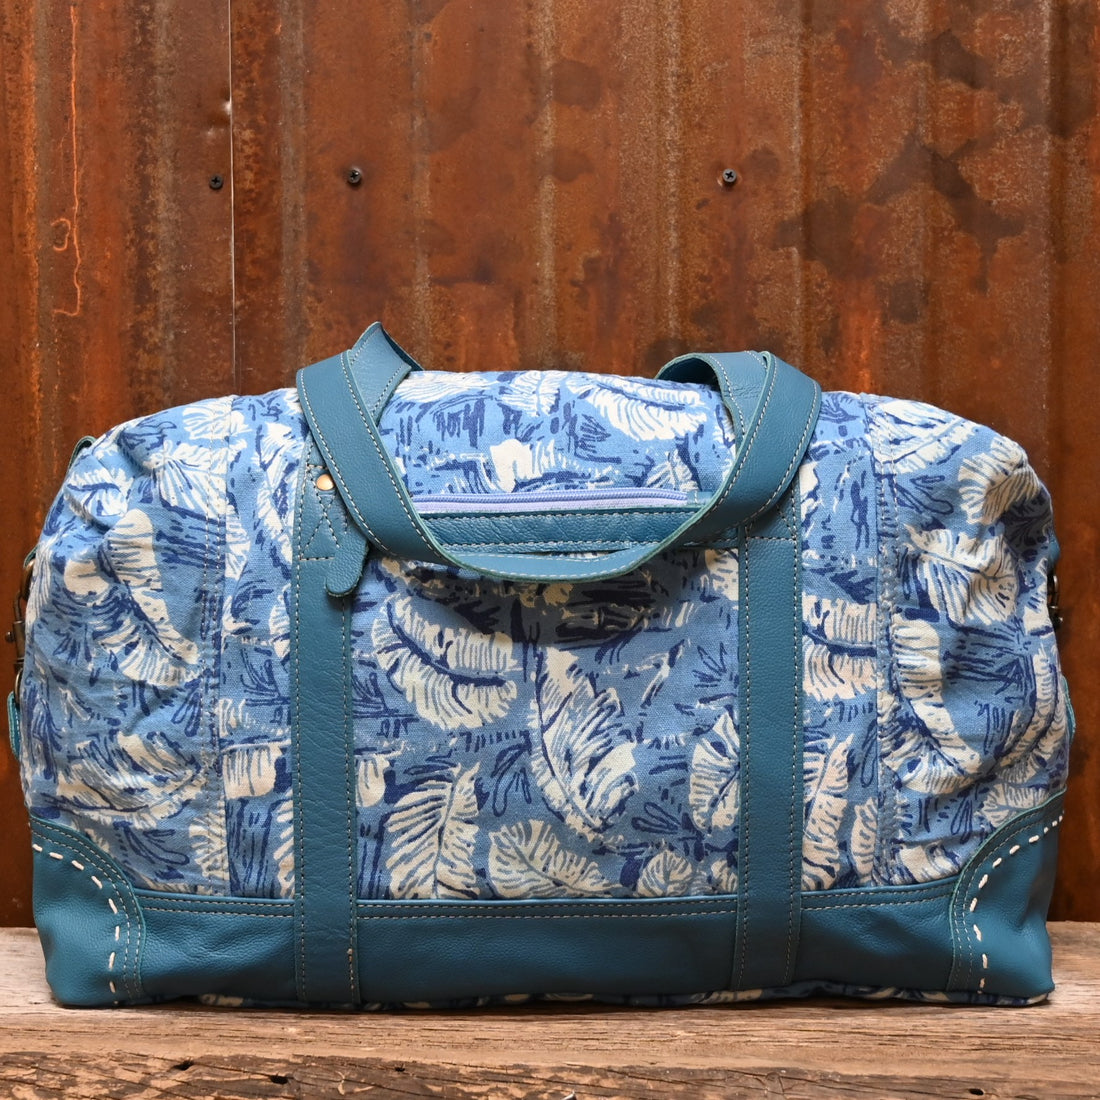 Myra Pinadora Traveller Bag in Blue Leather and Cotton view of bag